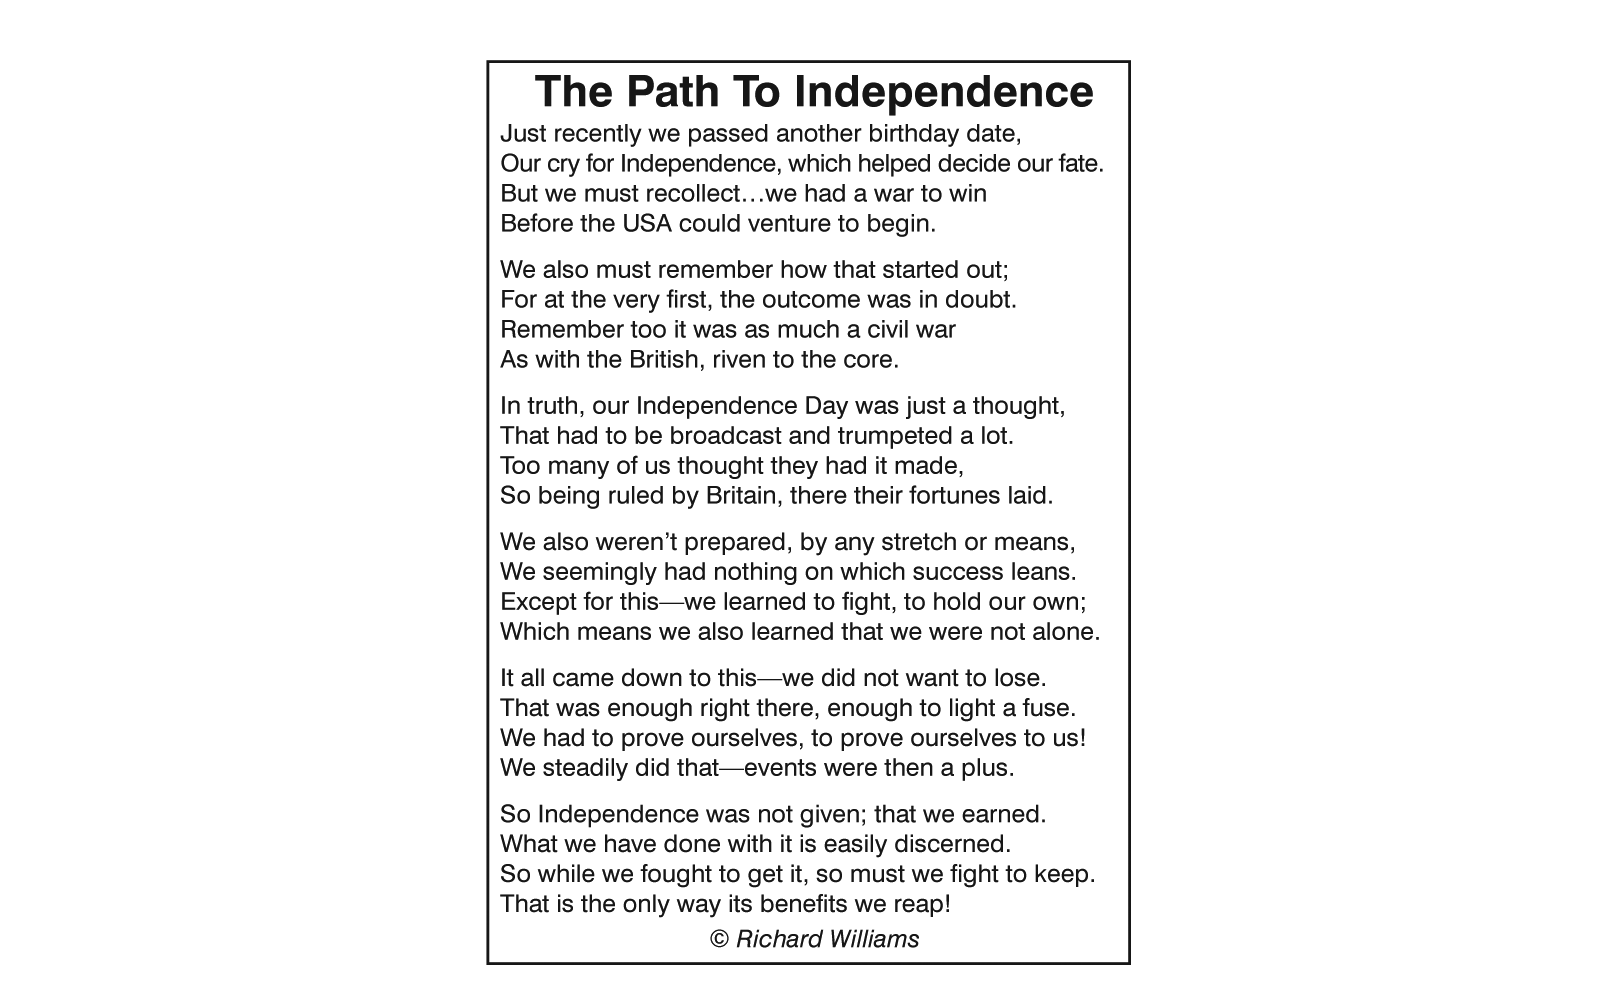 Richard Williams Poem: The Path To Independence